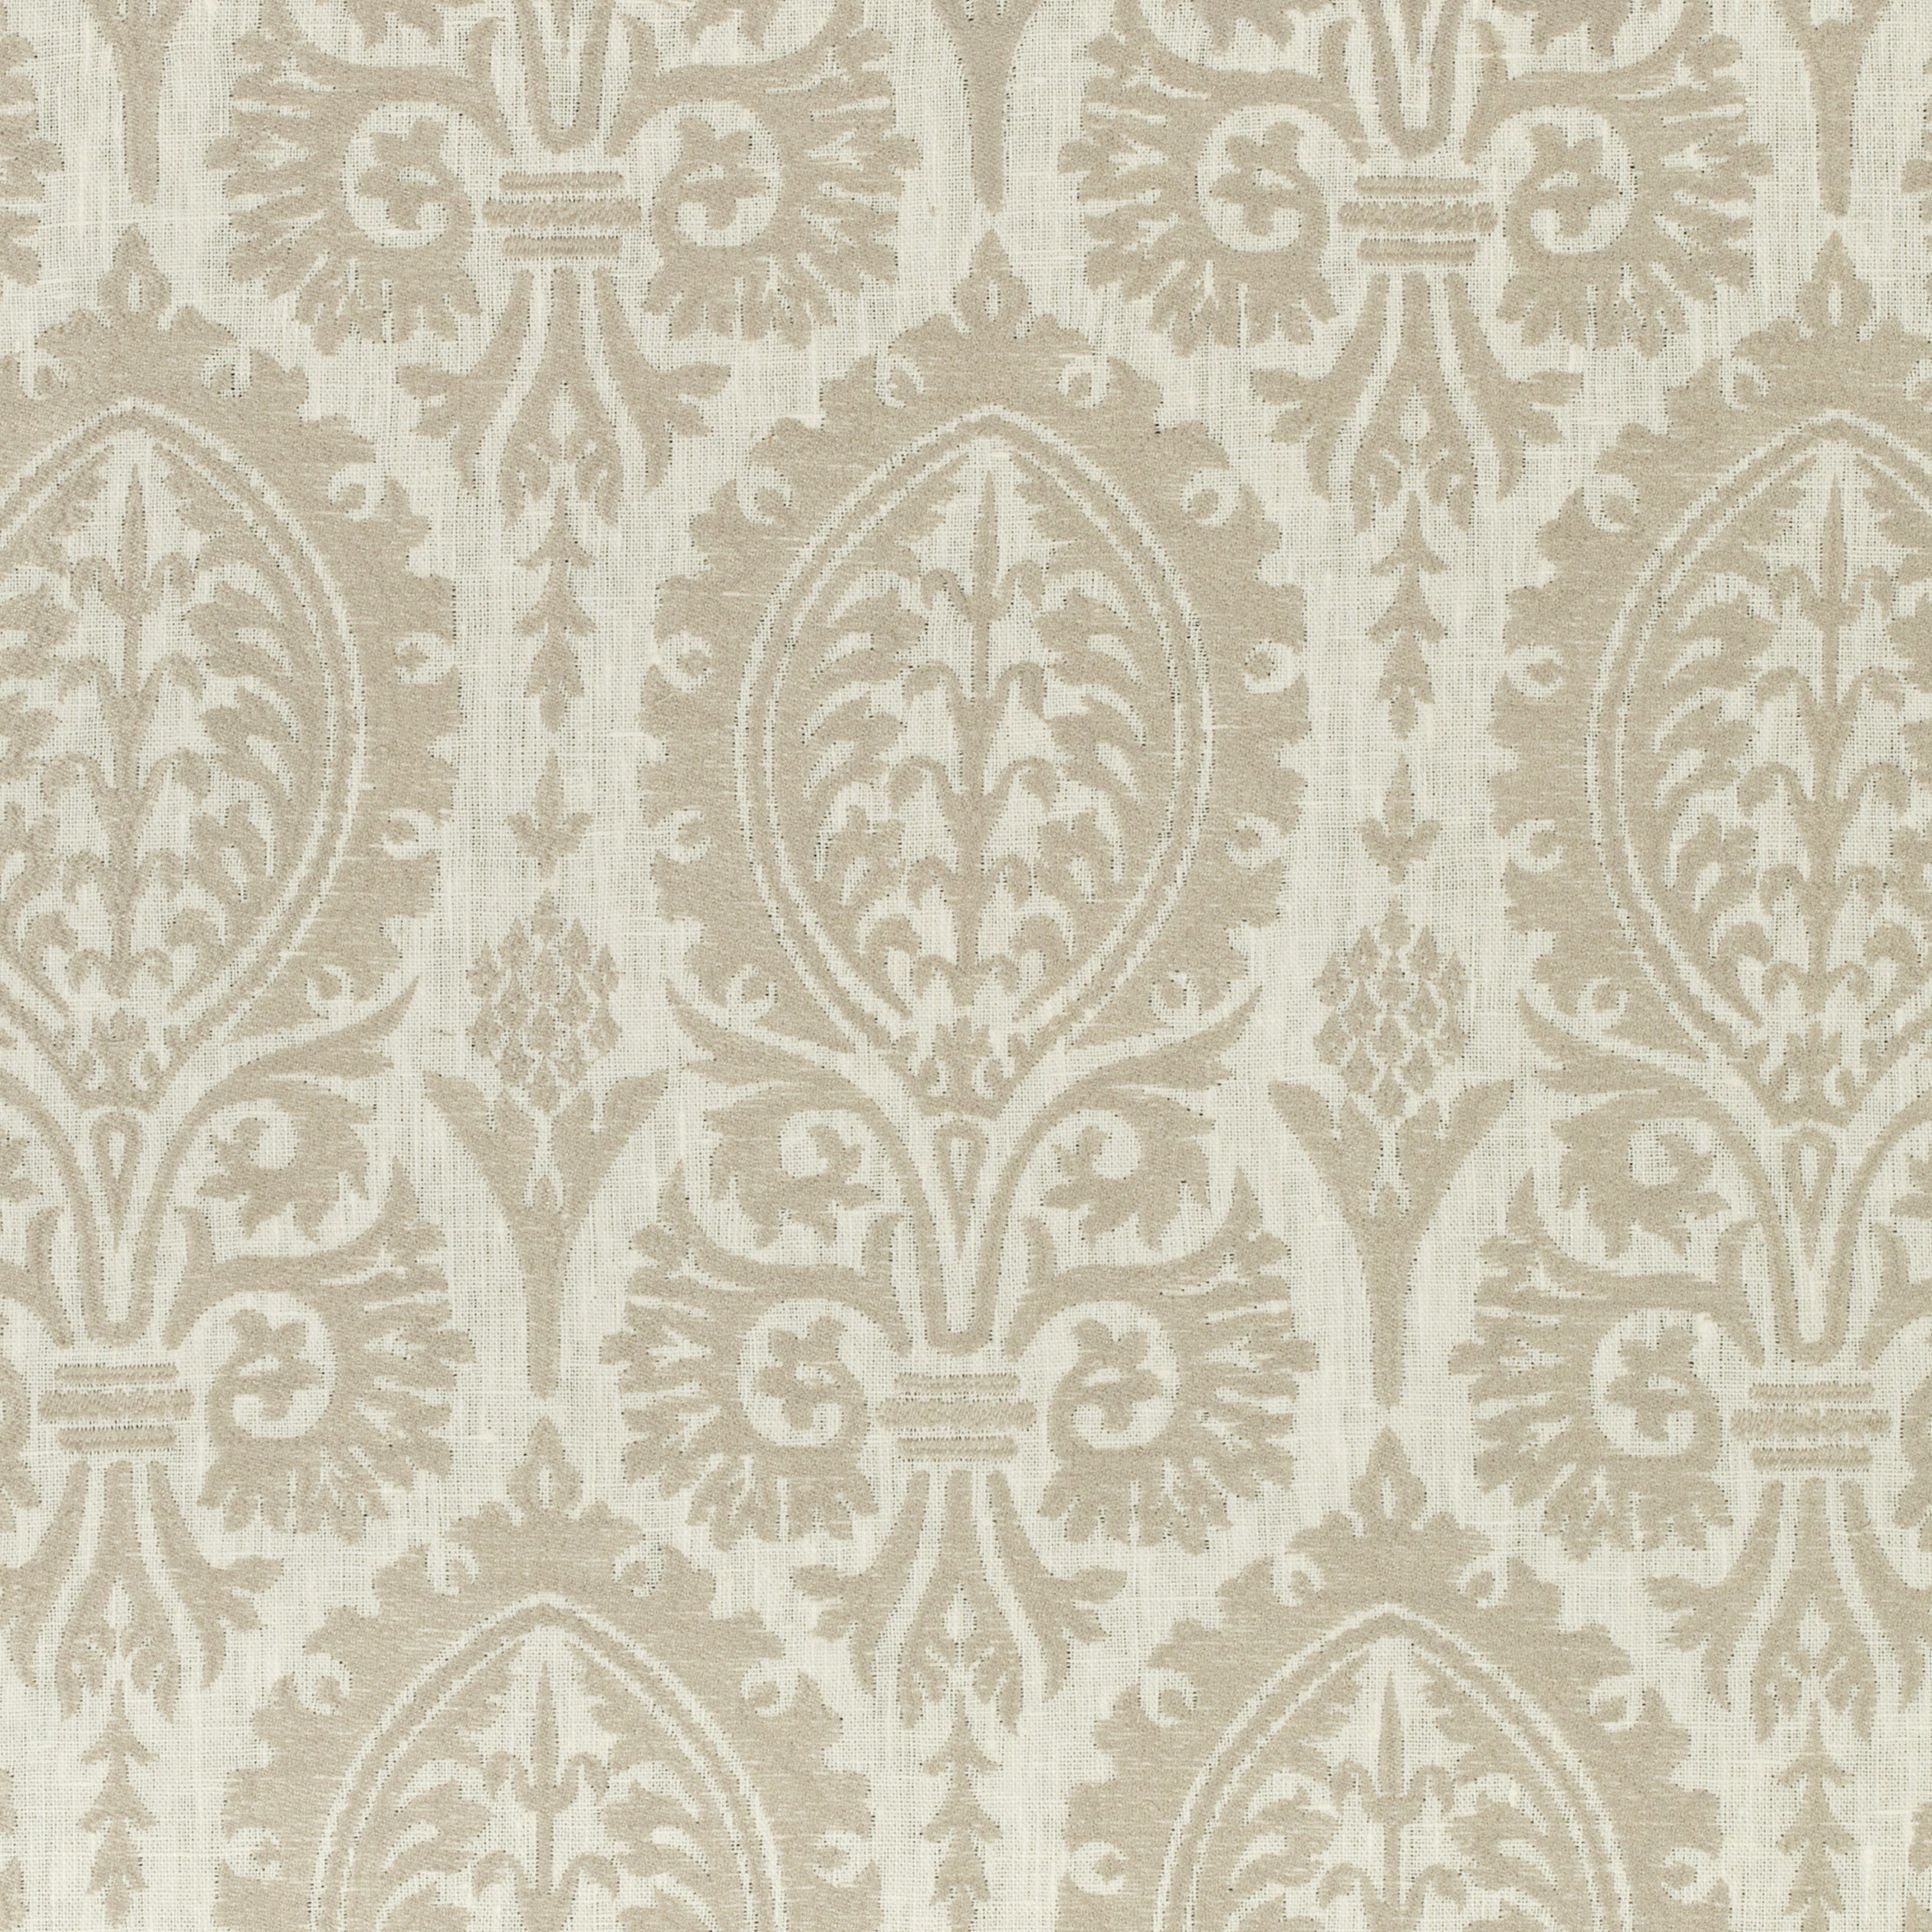 Sir Thomas Embroidery fabric in grey color - pattern number W772570 - by Thibaut in the Chestnut Hill collection